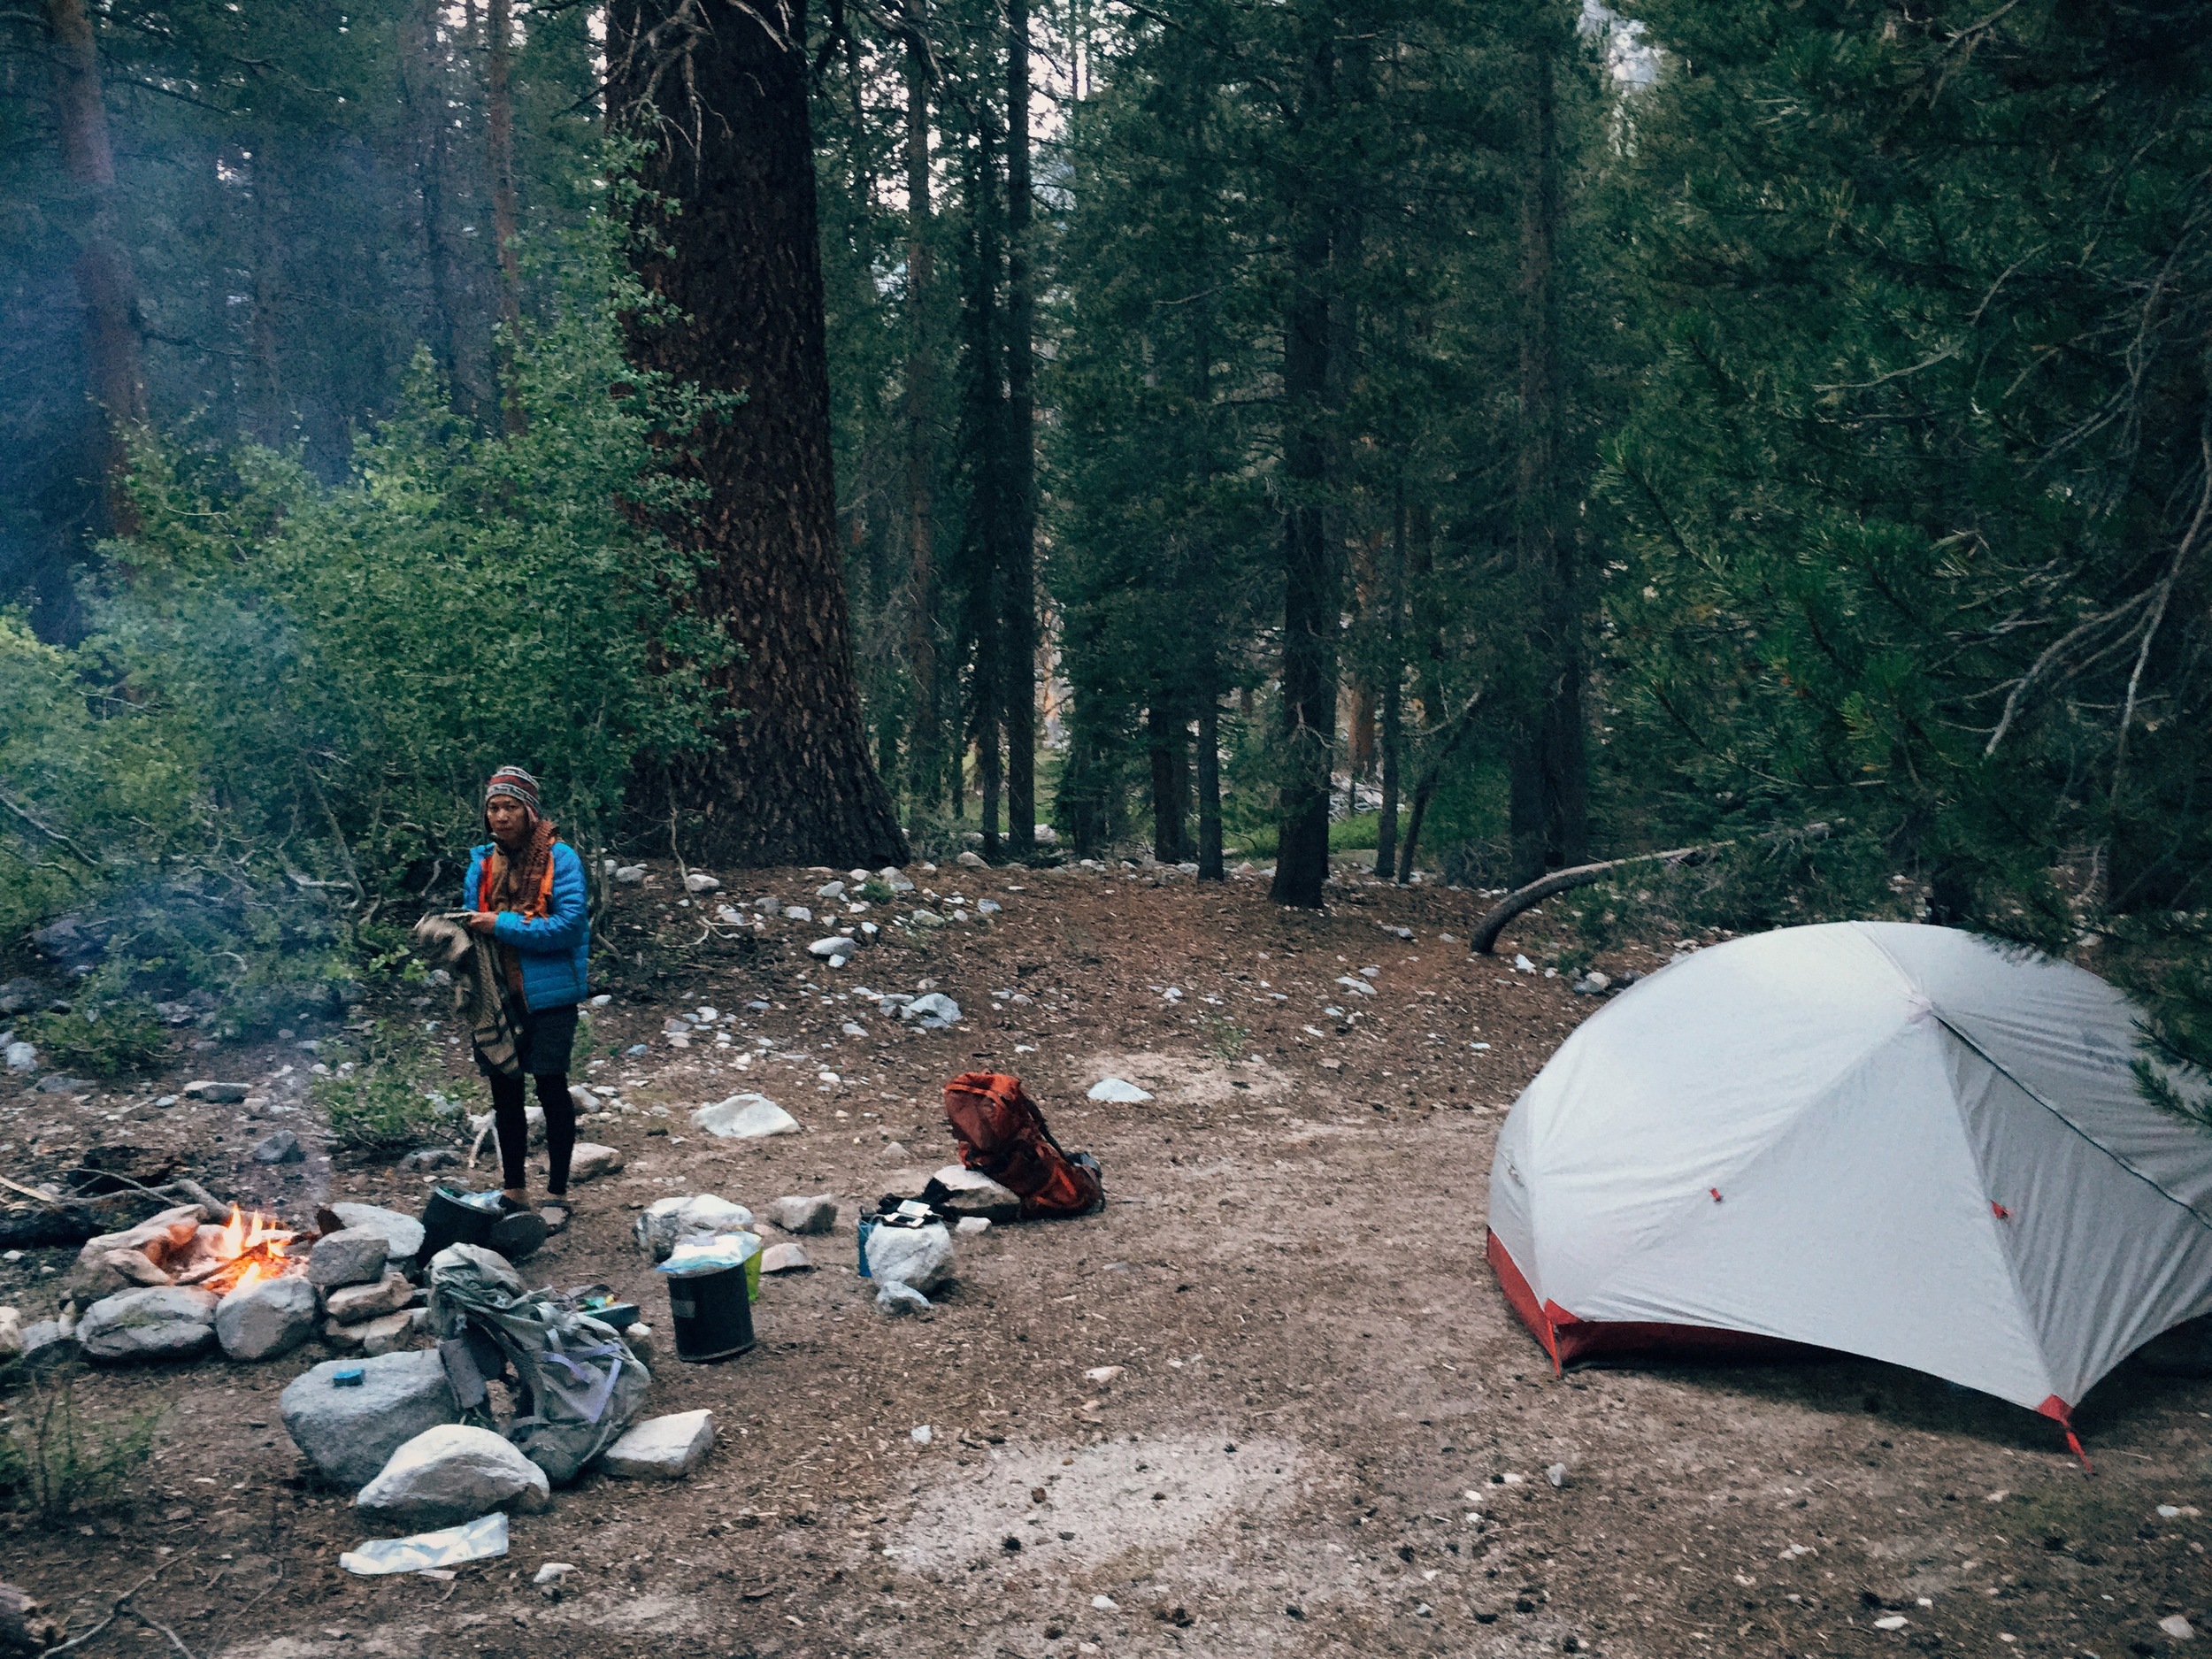  Day 11: camped at Deer Meadow near Palisade Creek, near the base of the Golden Staircase. 